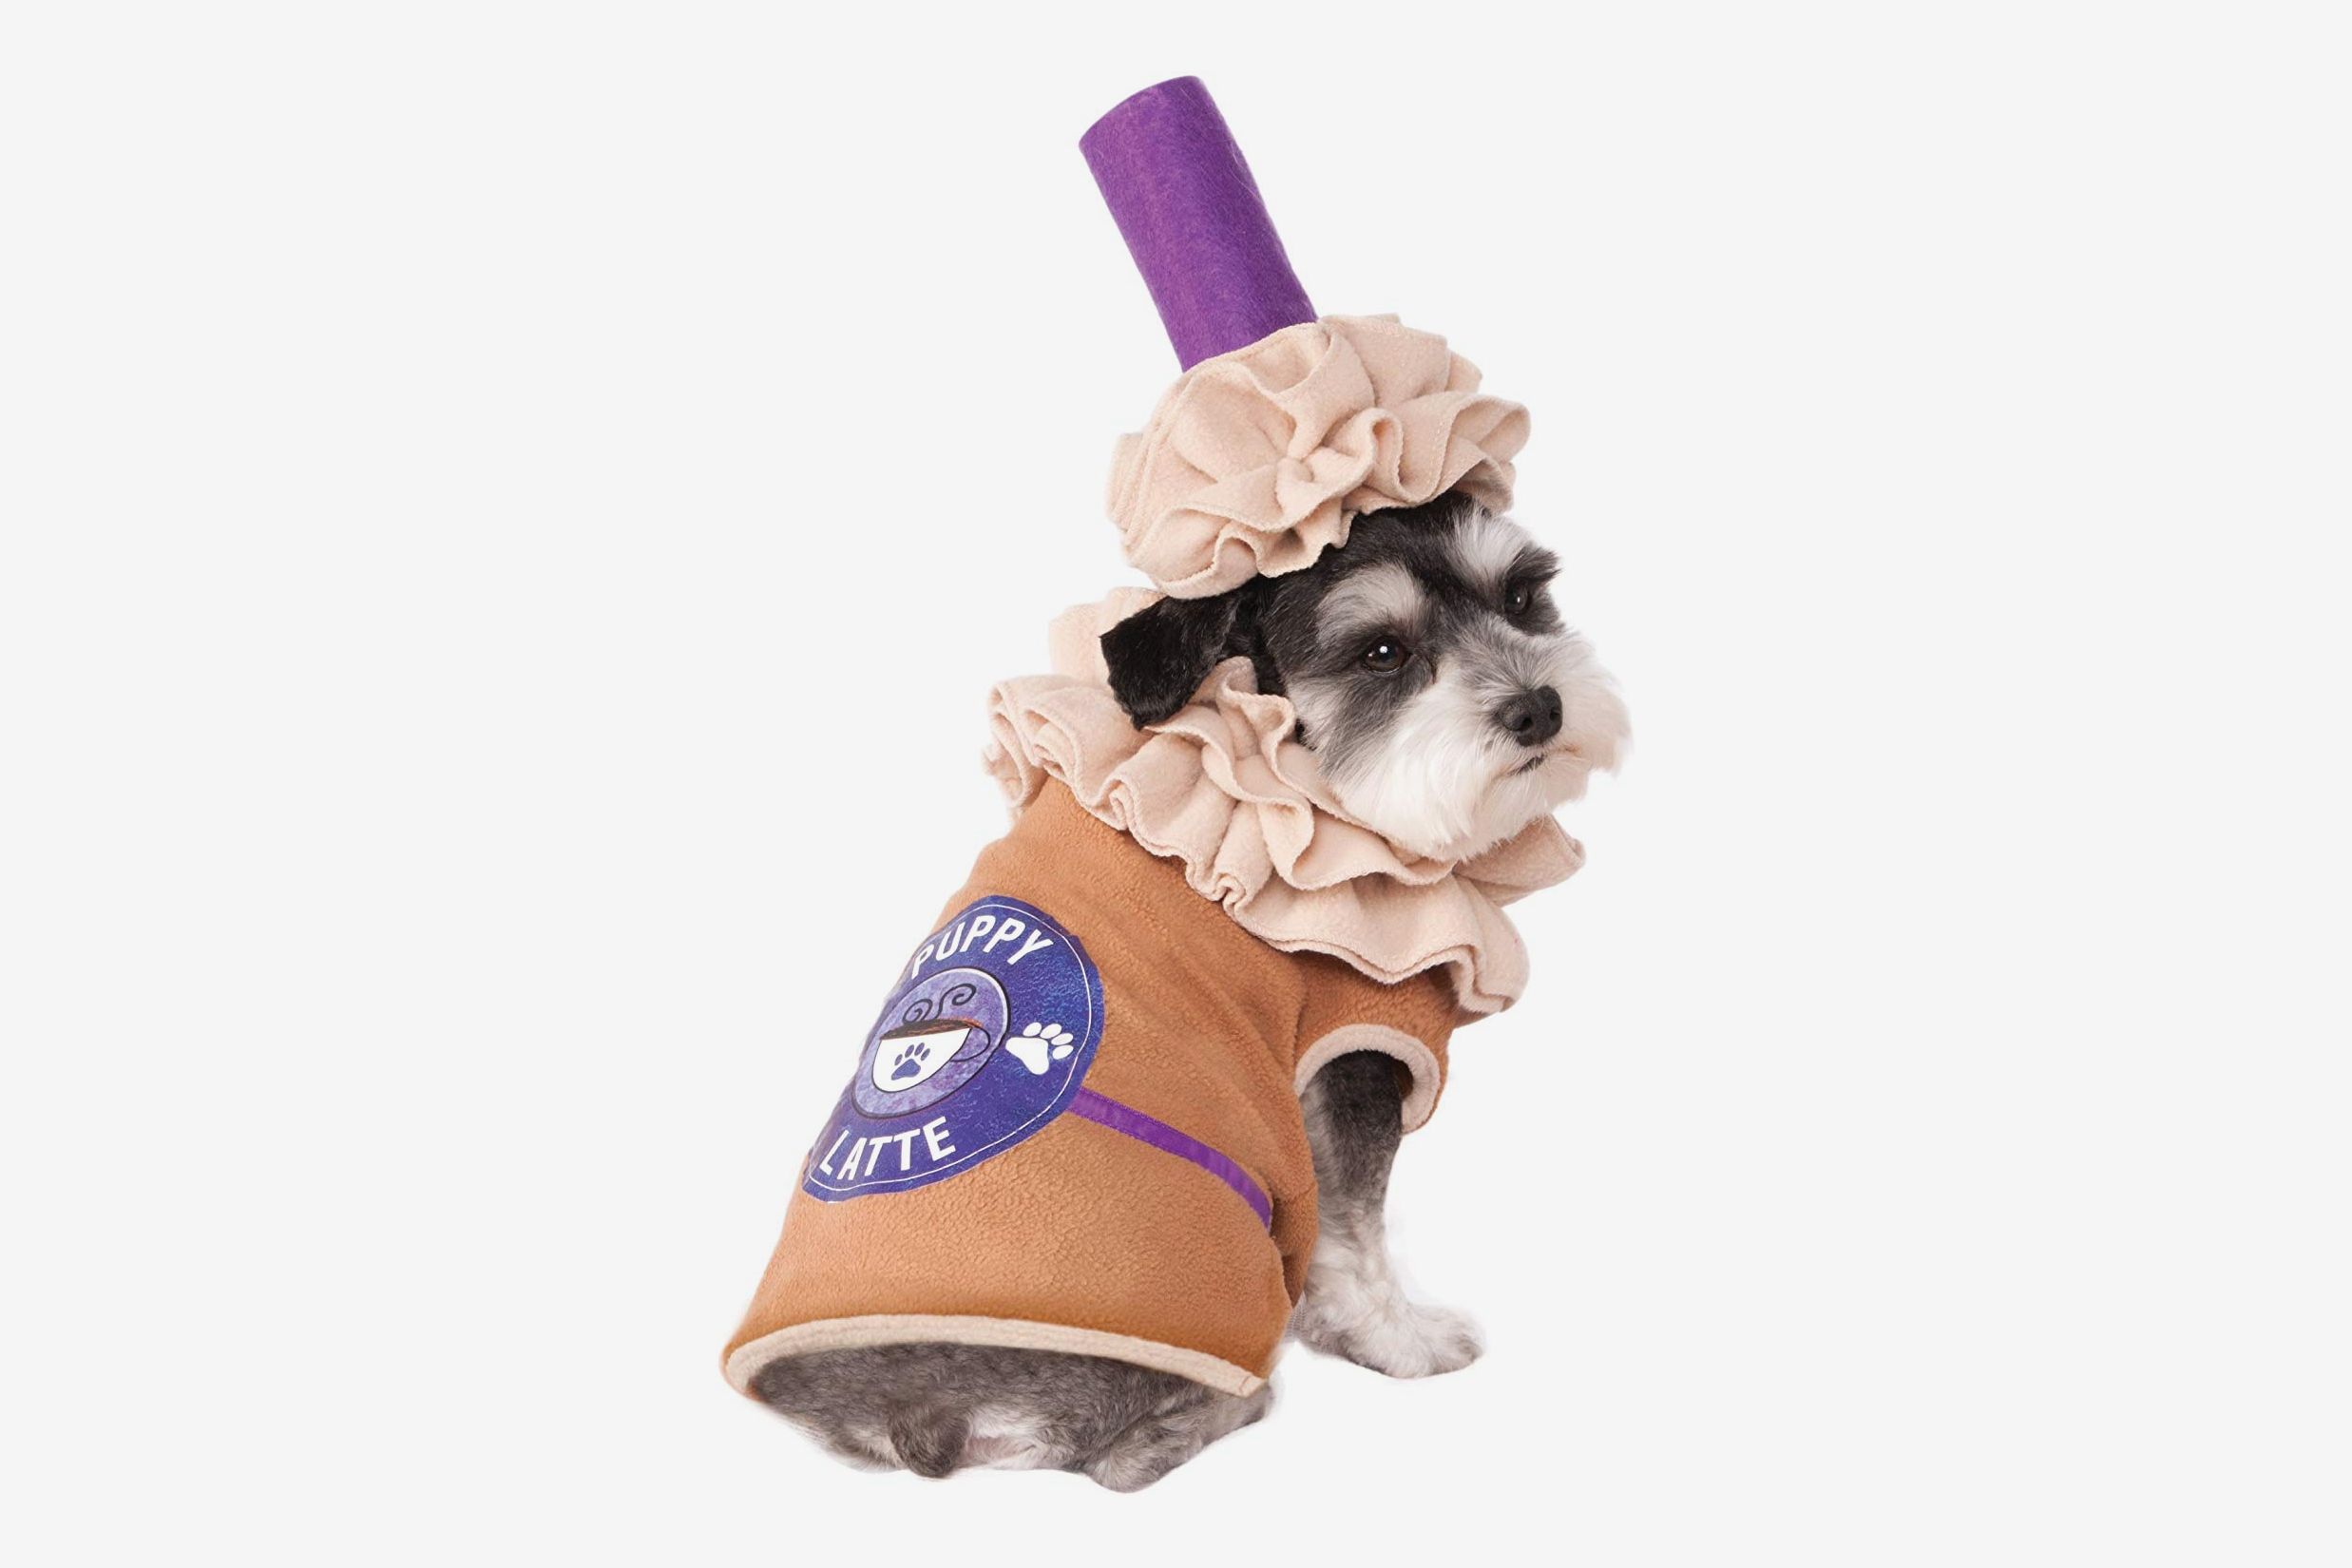 Animal Planet Peacock Dog Costume Extra Small